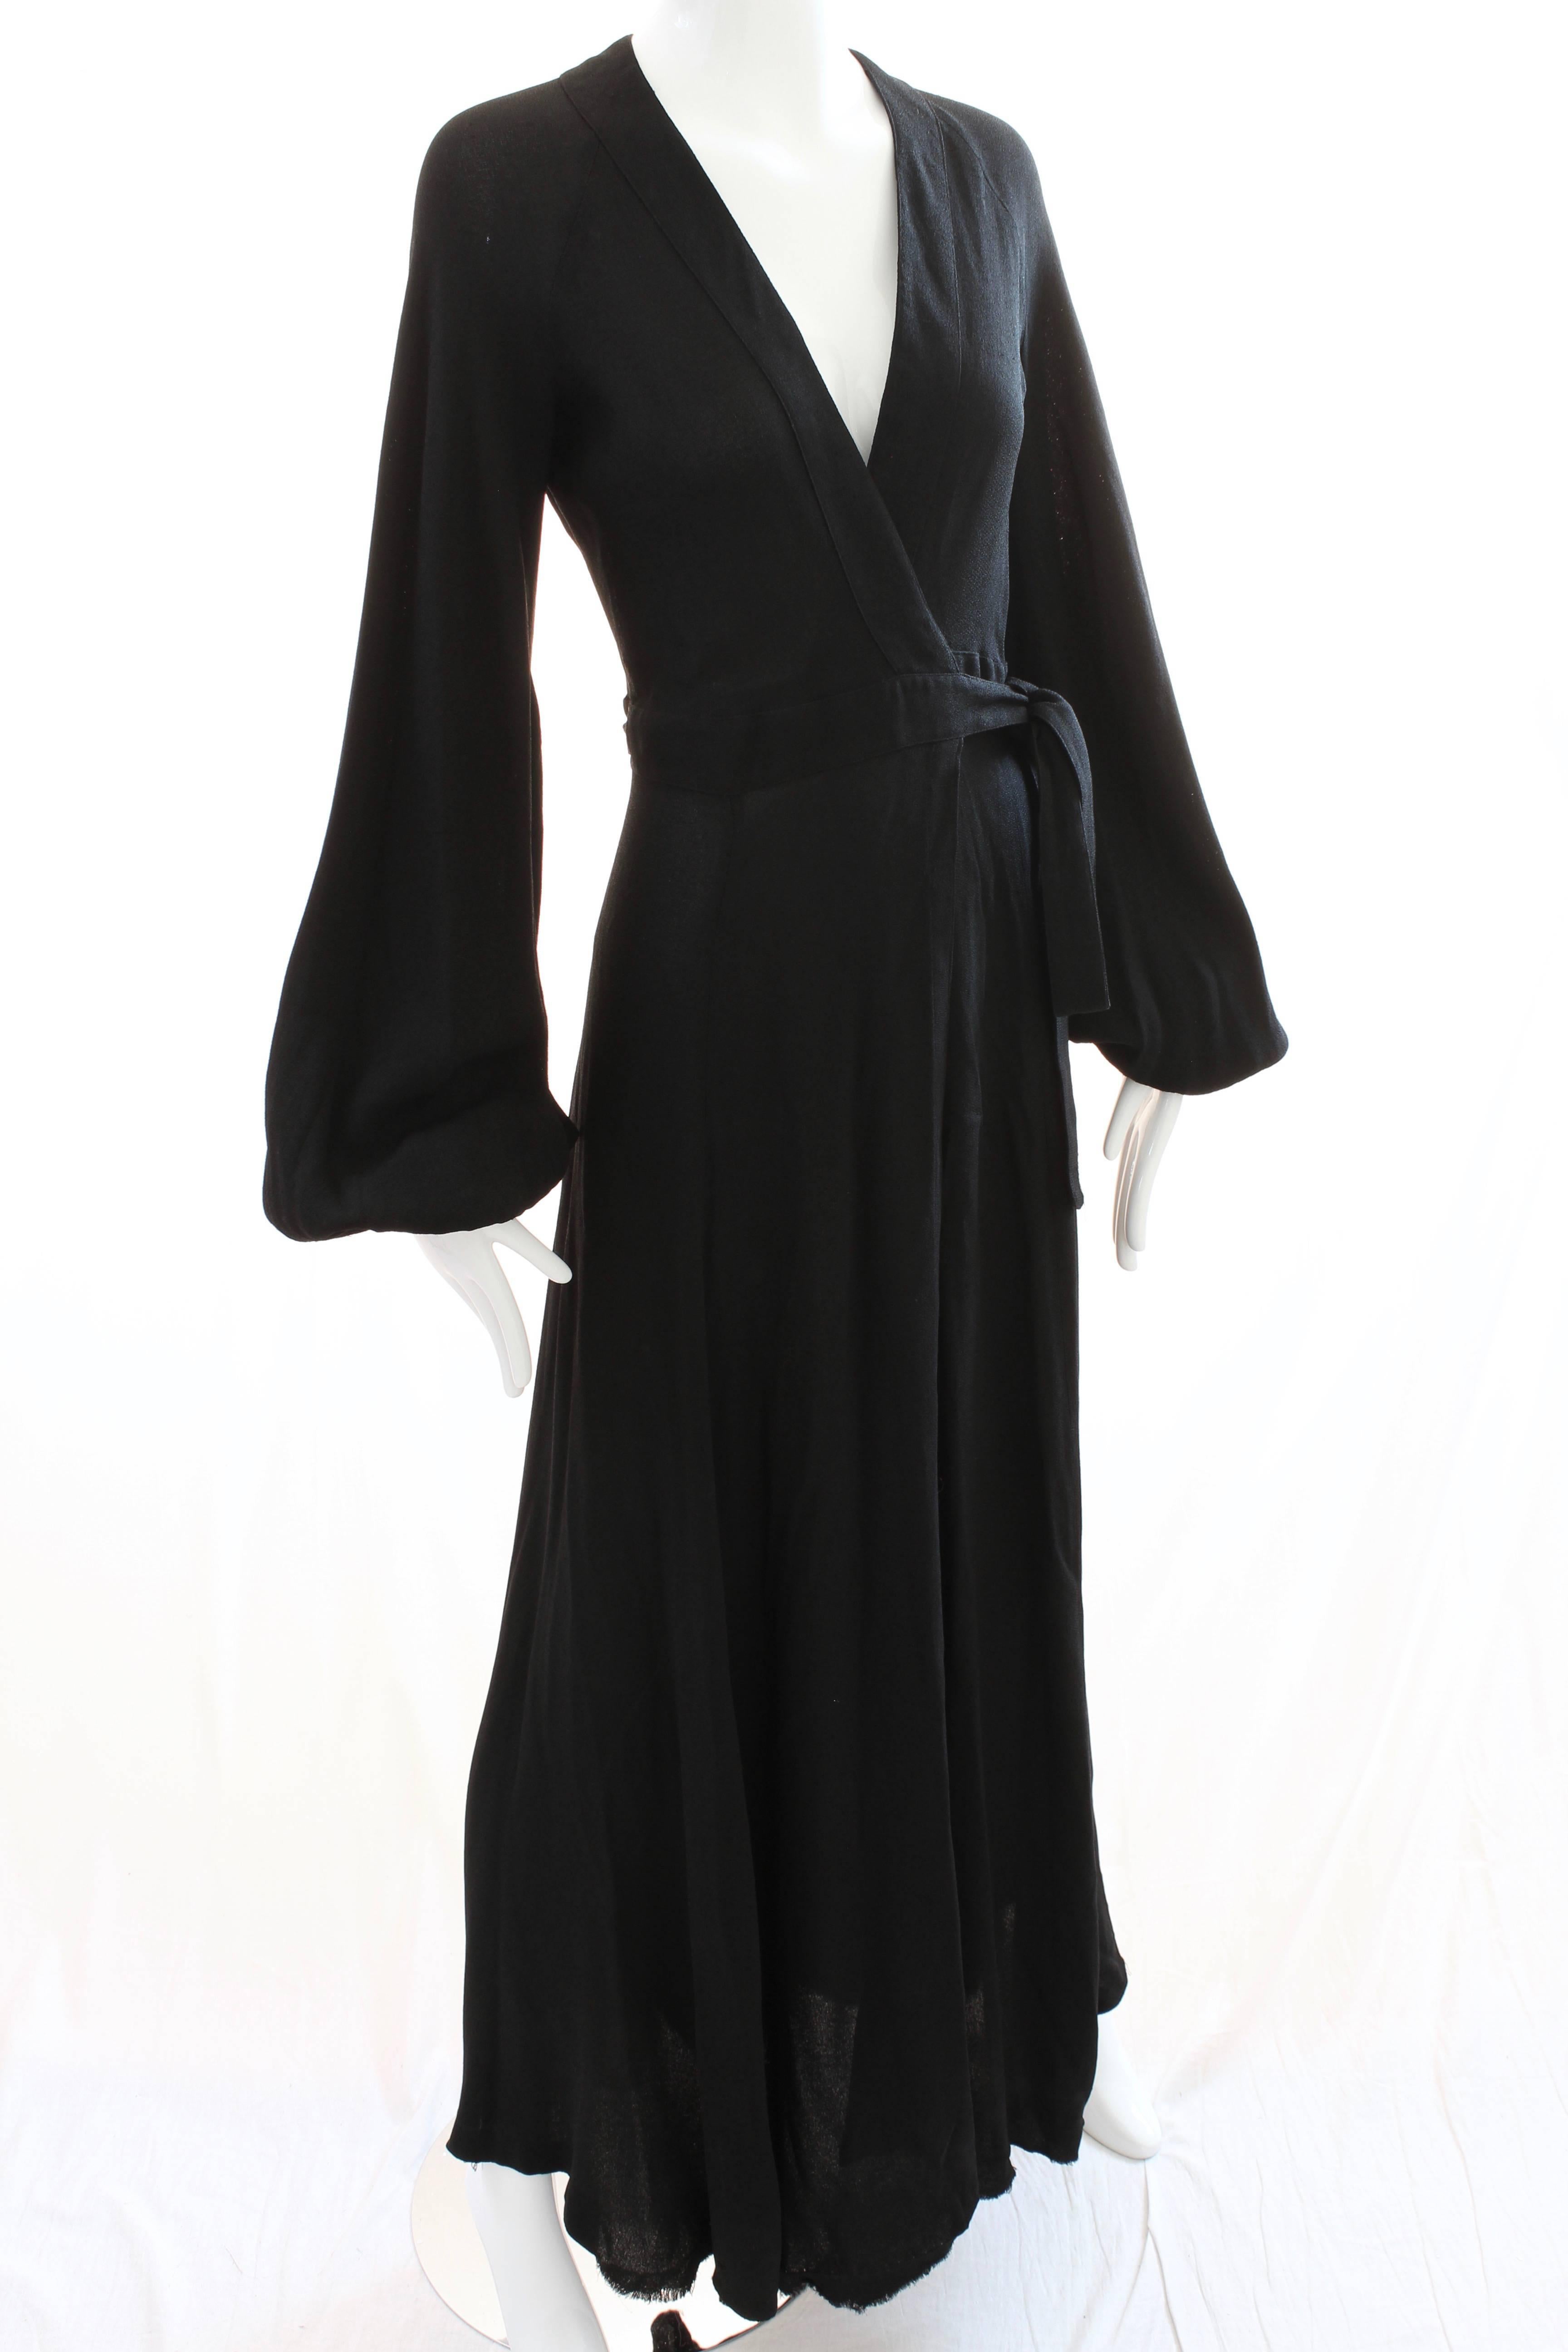 Here's a fabulous long dress by British designer Ossie Clark for Quorum. Dating to the early 1970s, it's made from Ossie's signature black moss crepe, features wrap ties, a low cut chest and a sexy cut out in back. In good vintage condition, the